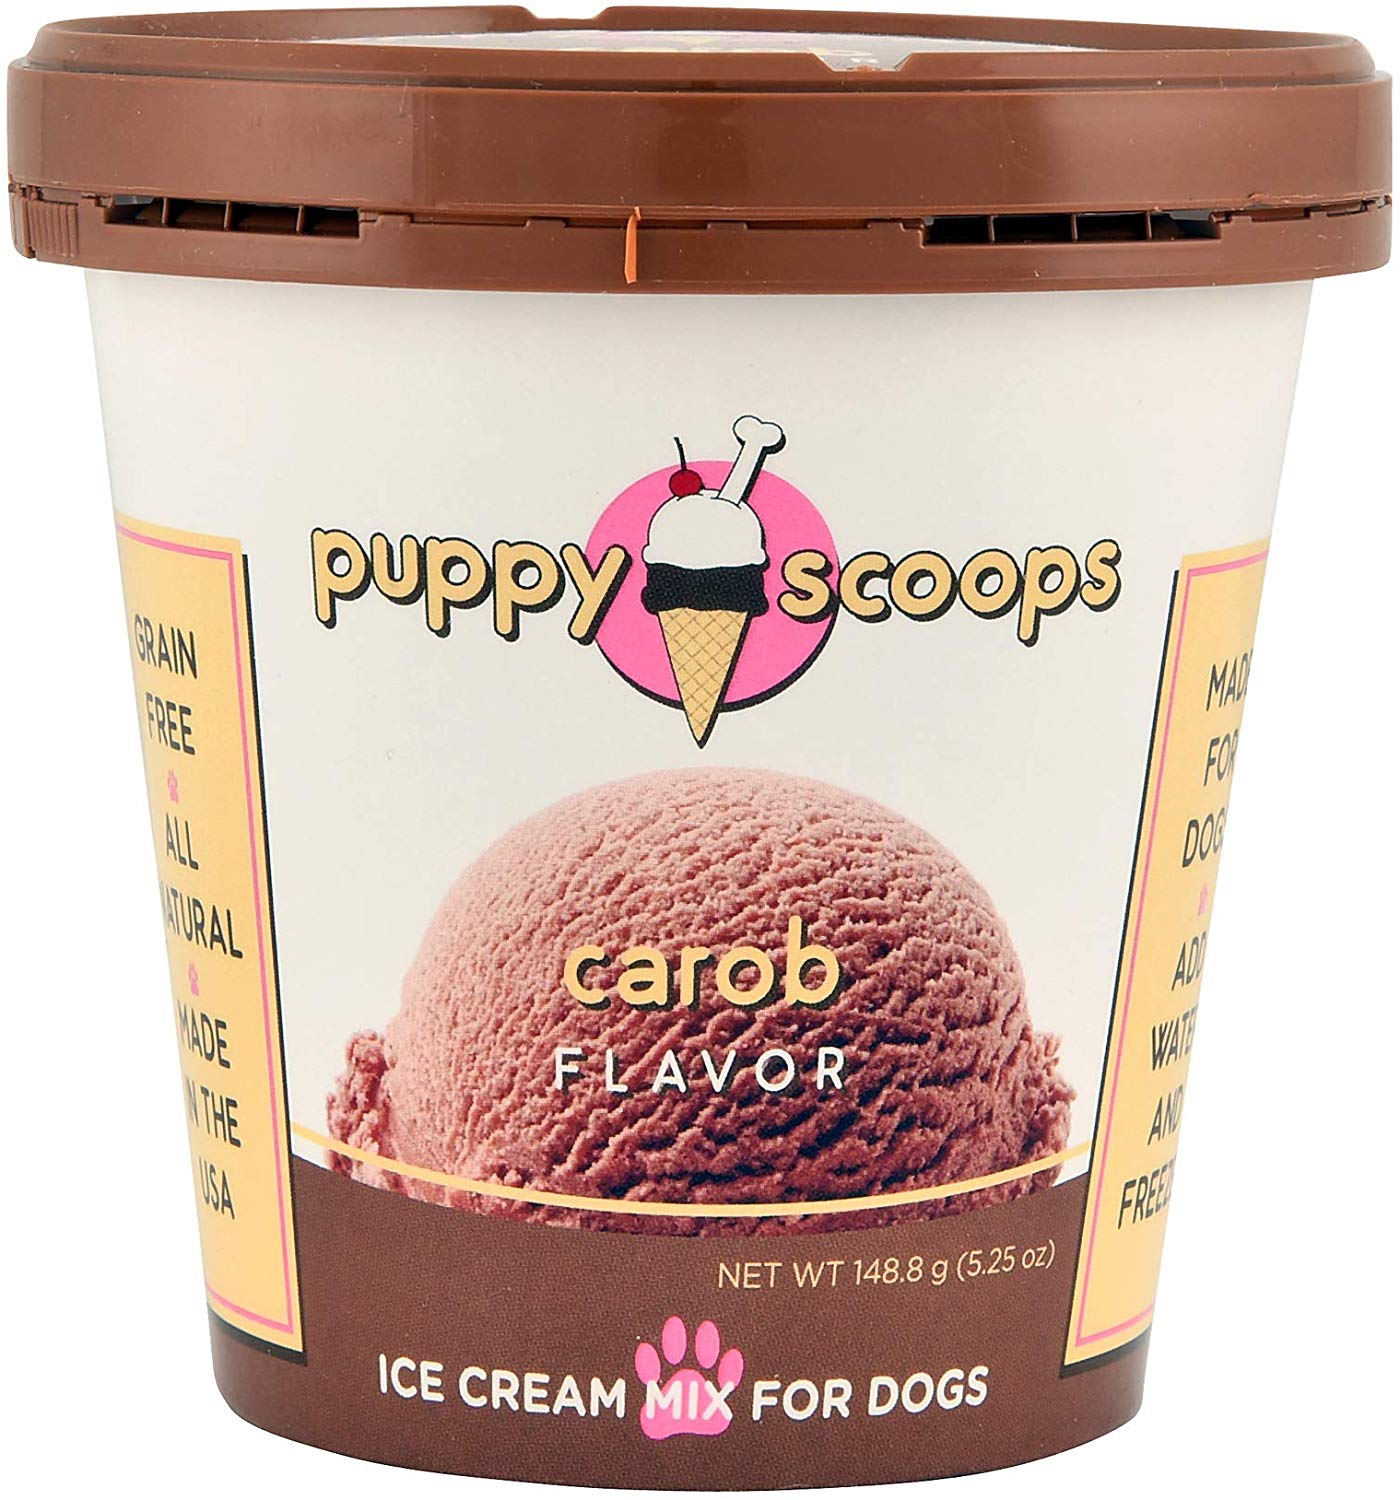 Puppy Scoops Ice Cream Mix for Dogs: Carob (Natural Dog Safe Chocolate Flavor) - Add Water and Freeze at Home